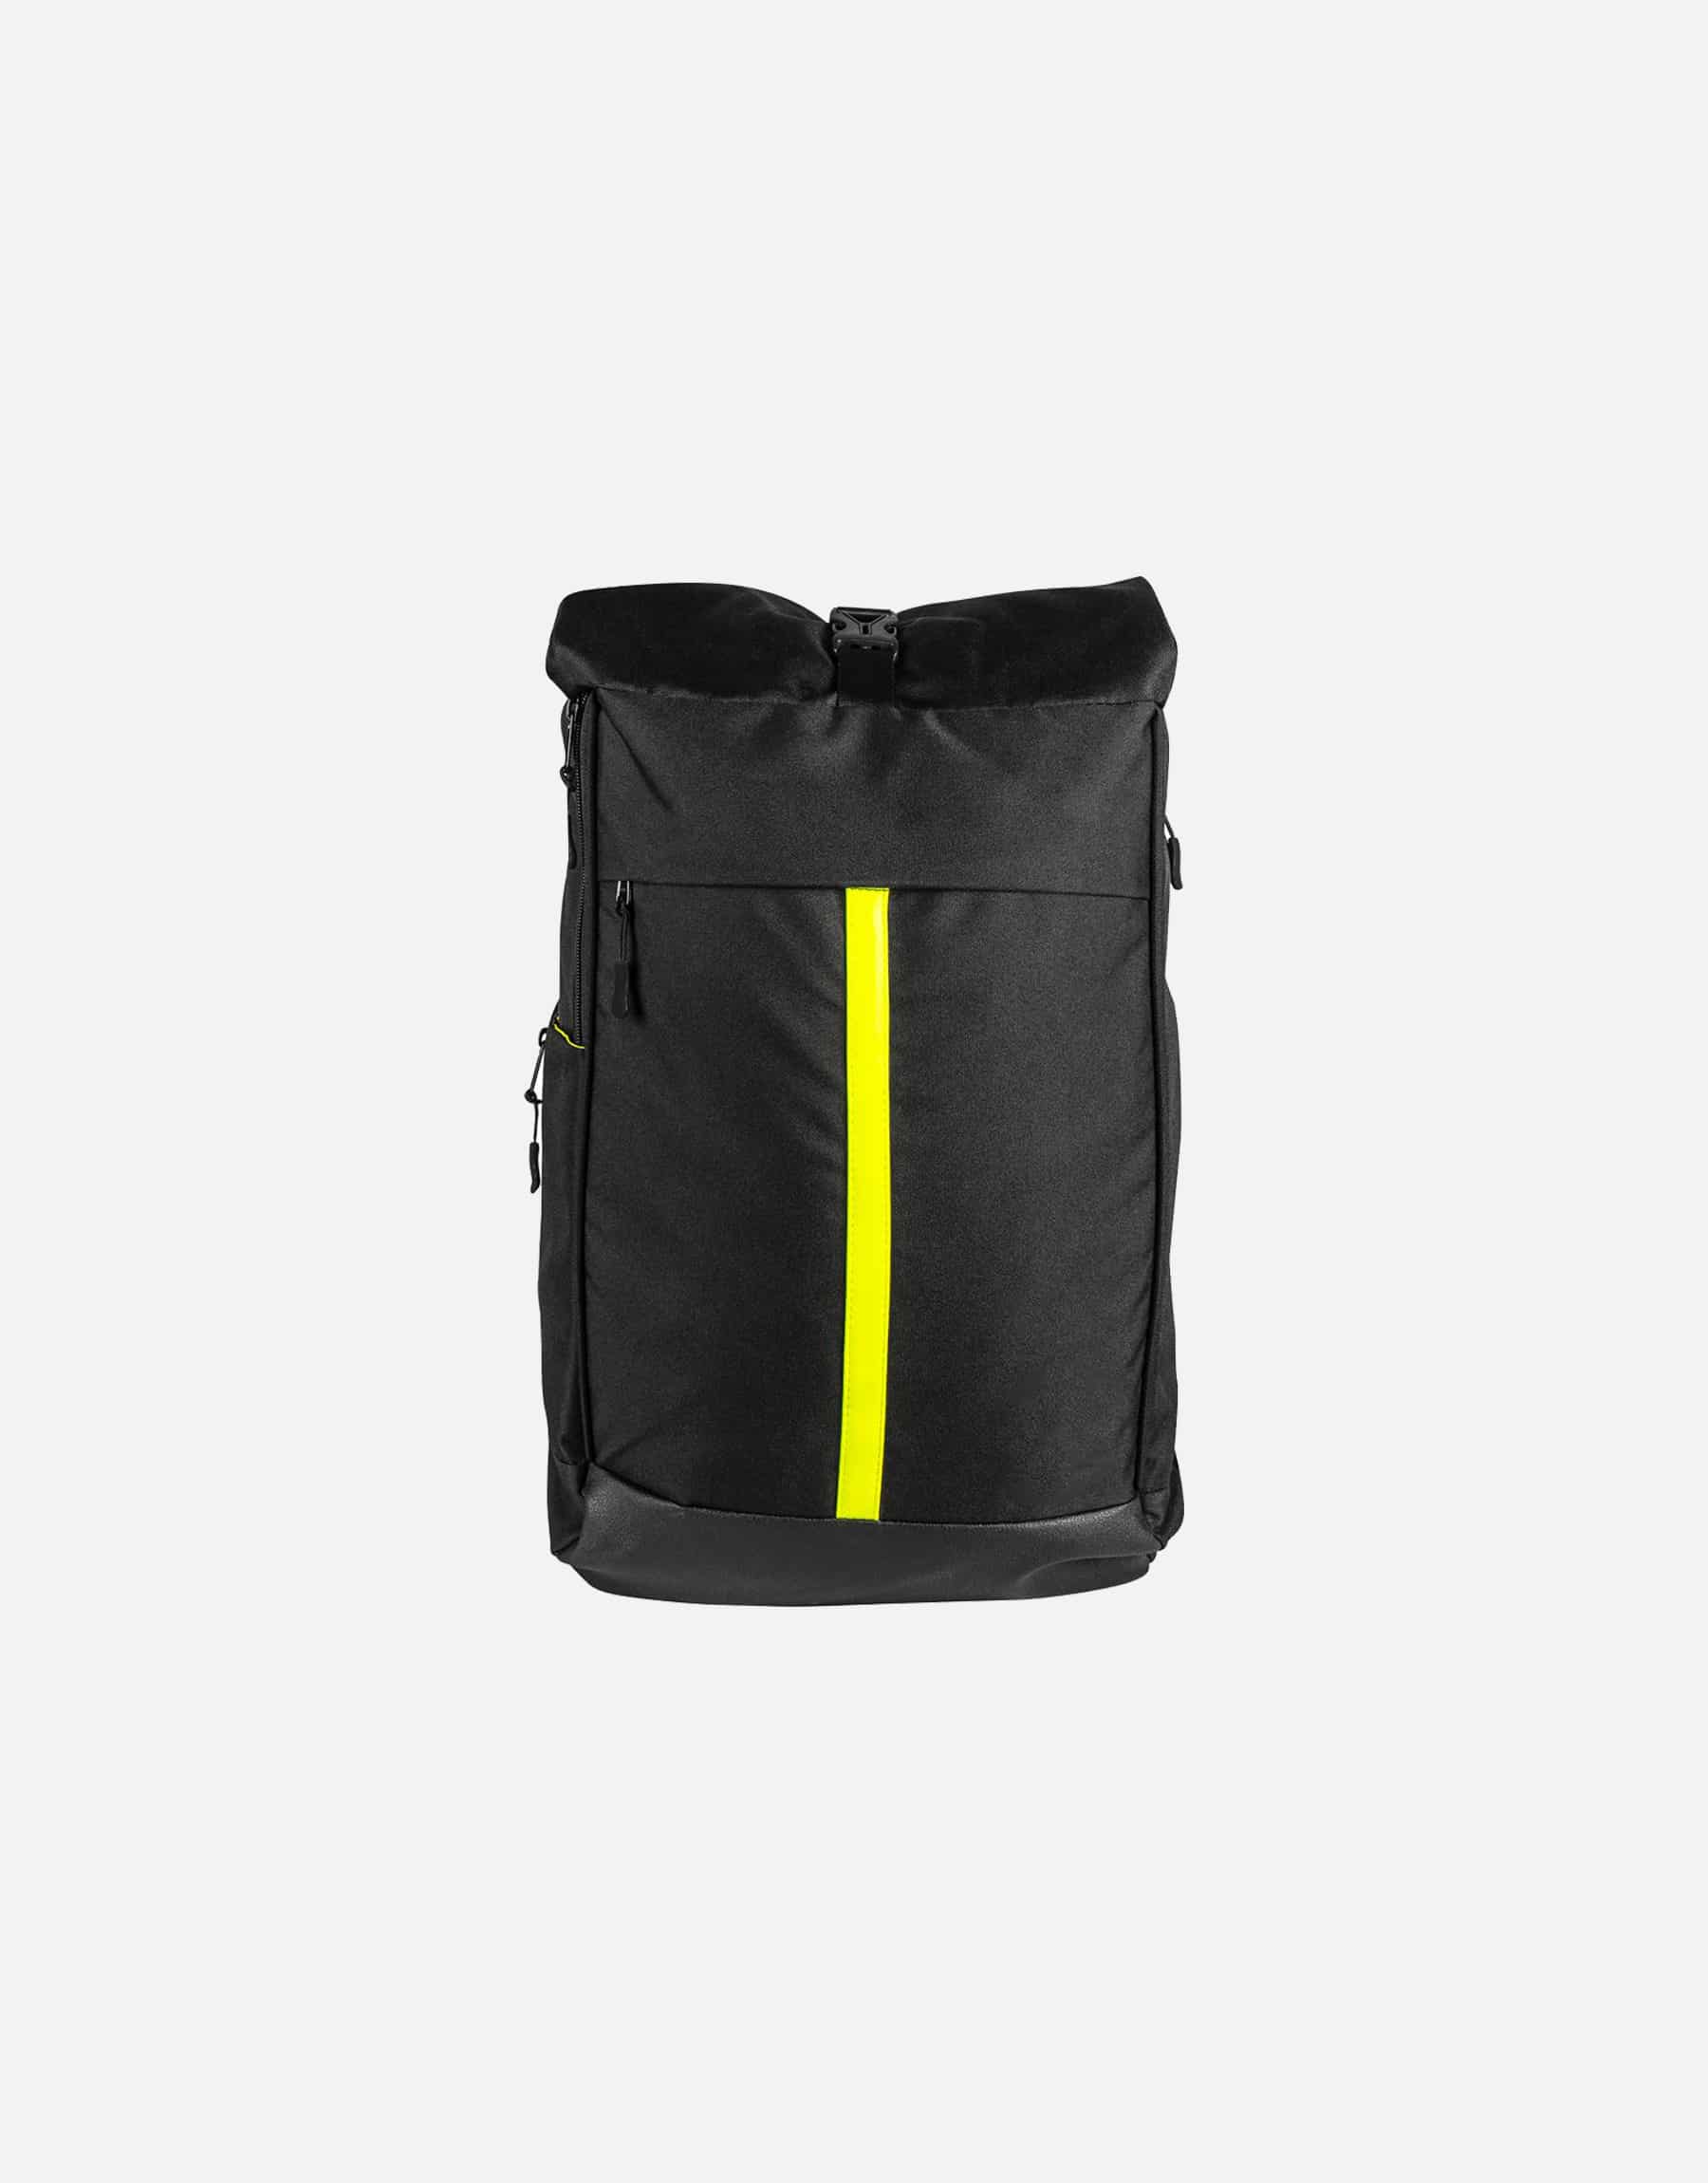 product-backpack2-1